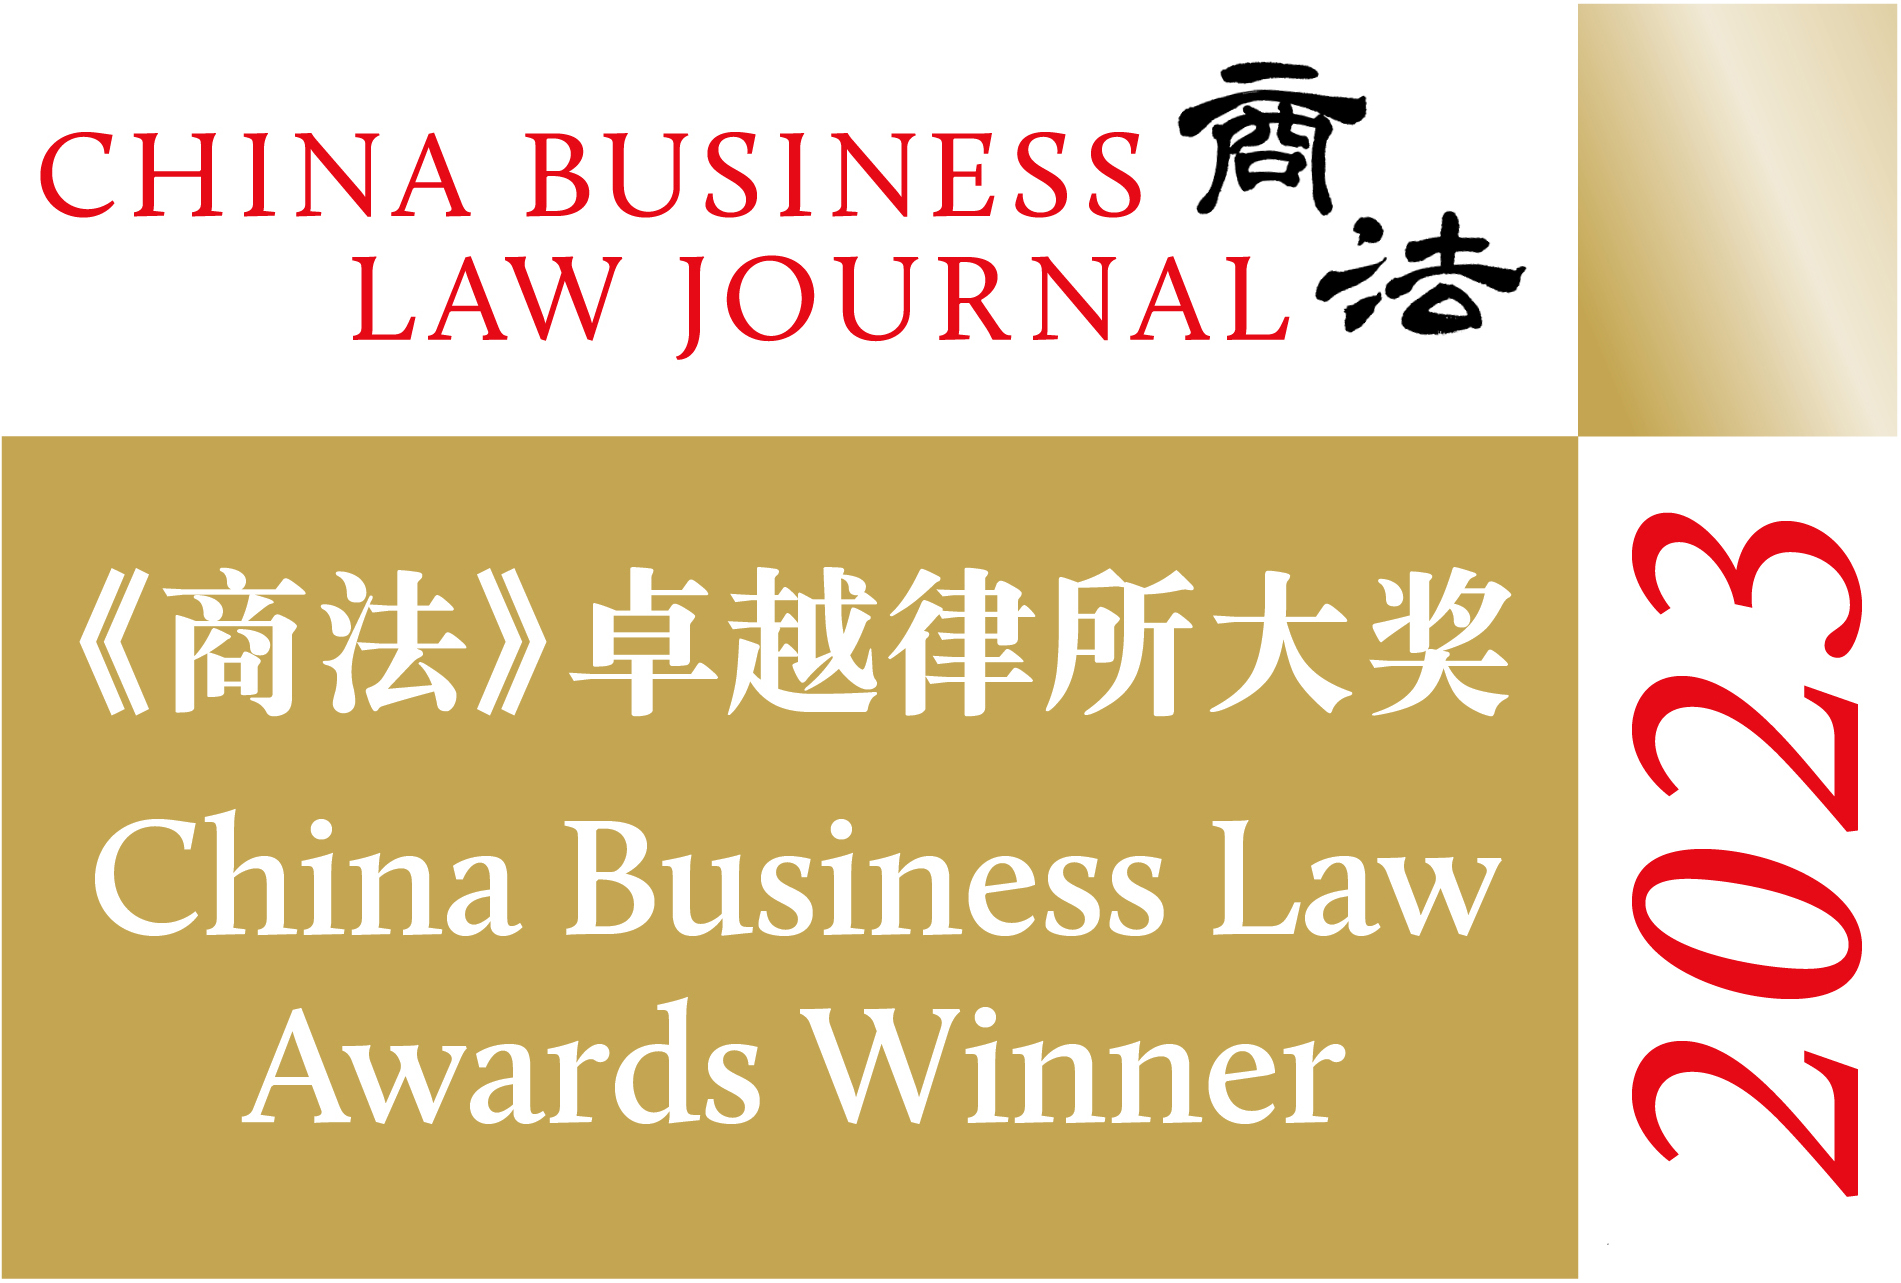 “China Business Law Awards Winner 2023” by China Business Law Journal